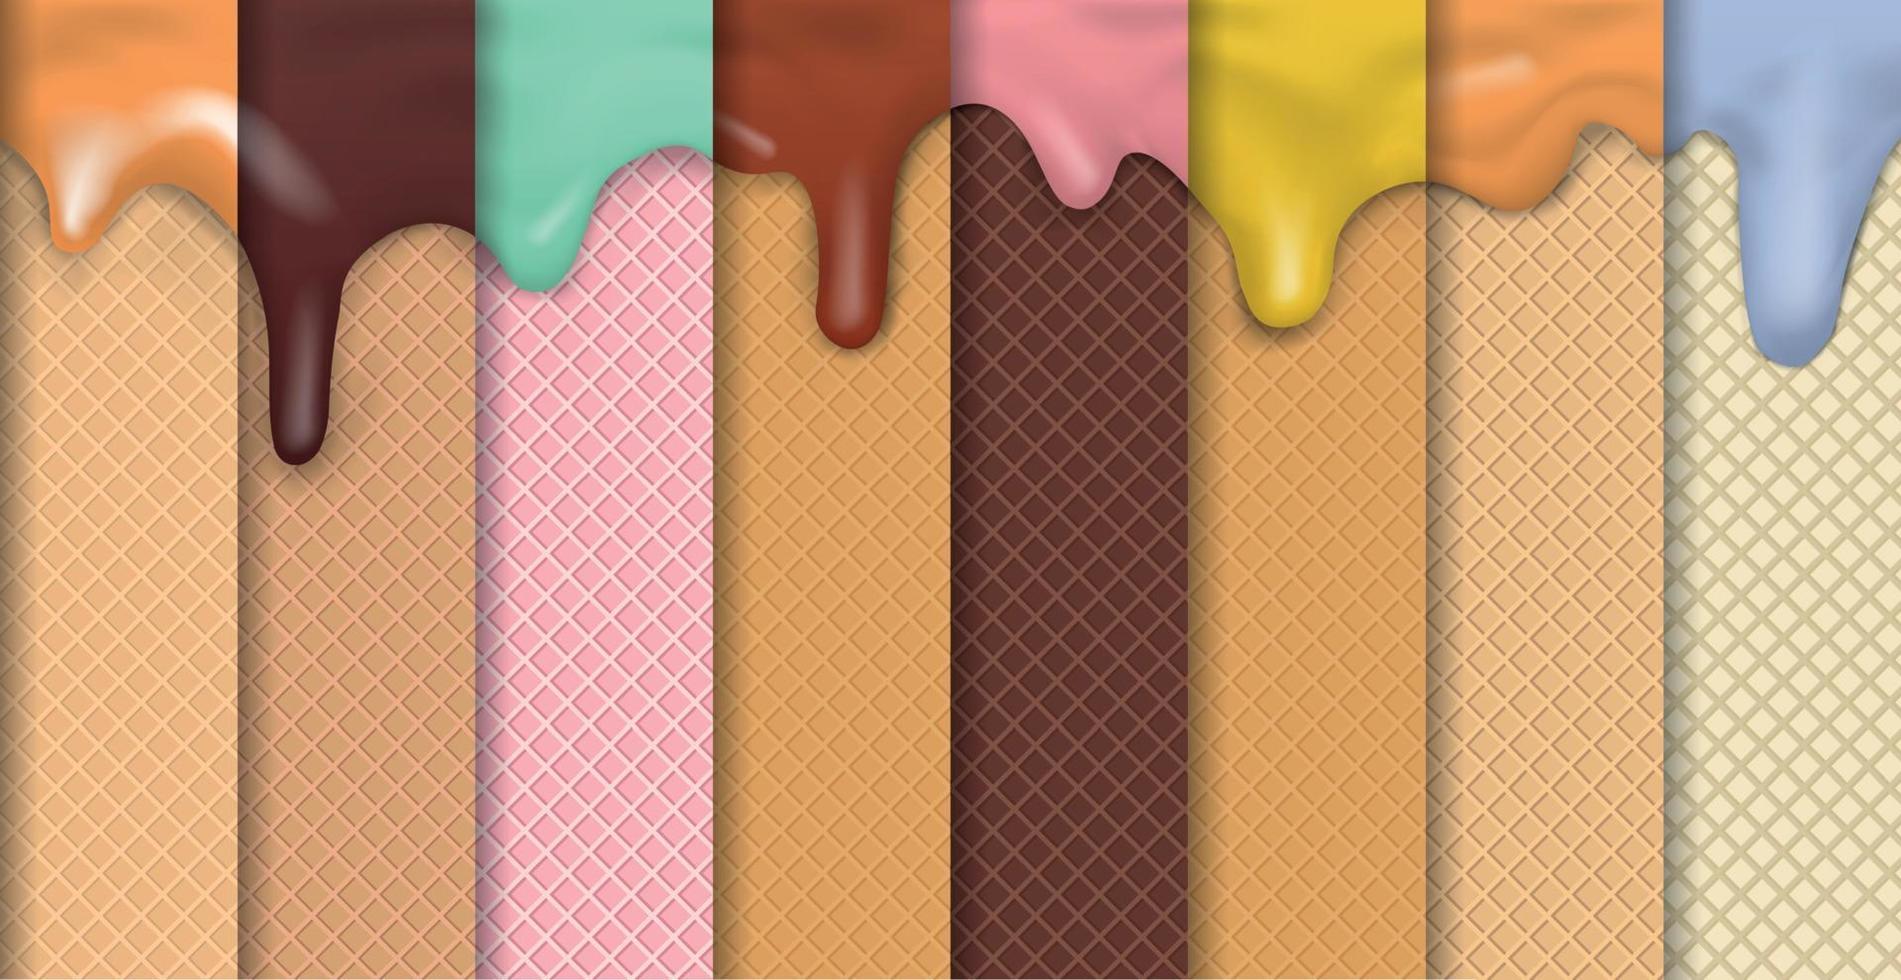 Set 8 pcs. texture background of ice cream of different flavors and colors - Vector